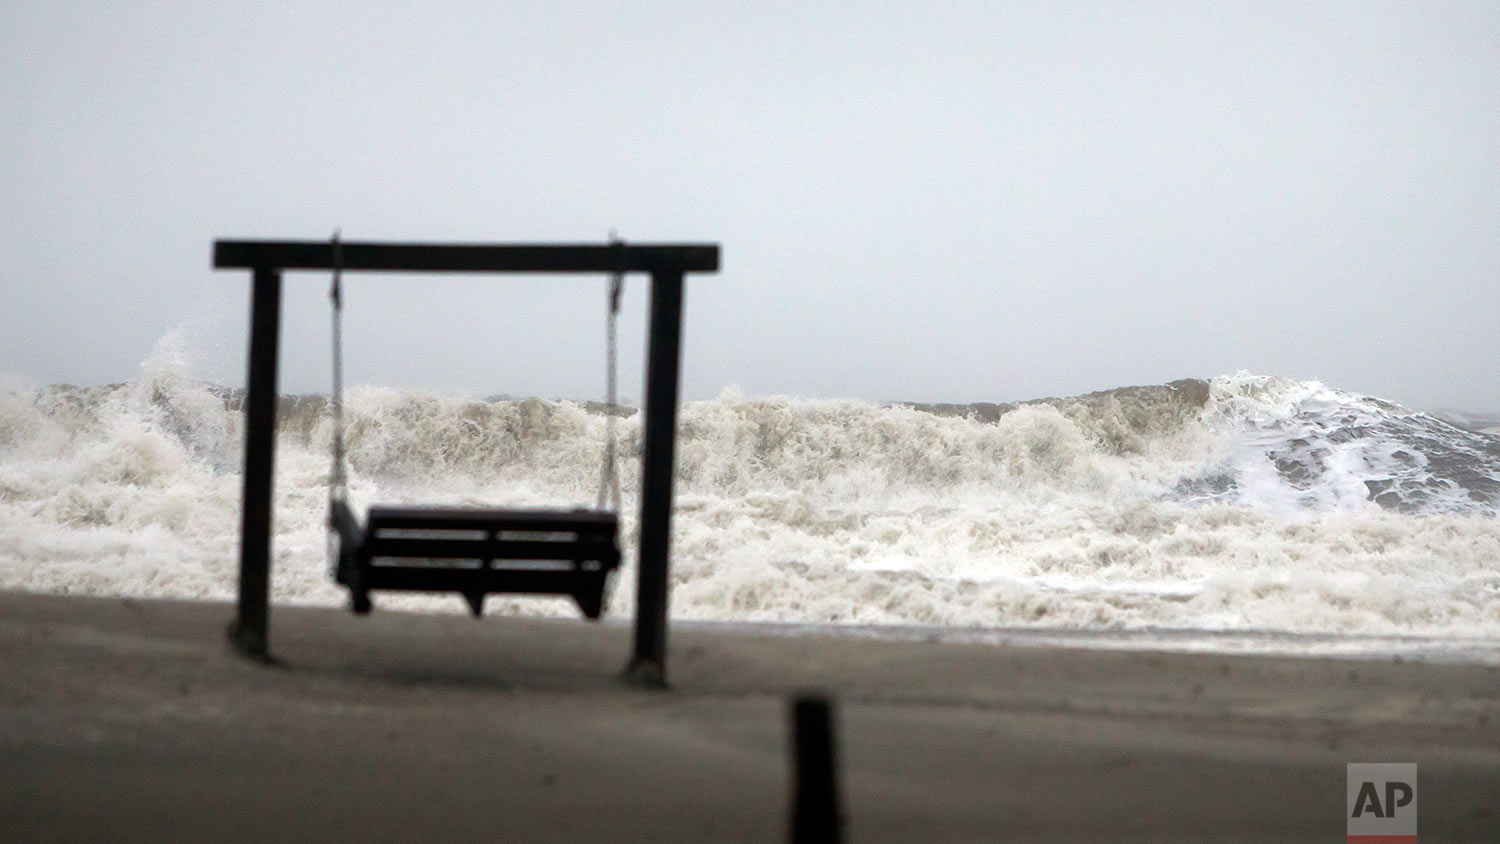  Waves on the southend beach of Tybee Island, Ga. pound the beach as Tropical Storm Irma heads into the state, Monday, Sept., 11, 2017. Tybee officials said wind gusts are reported at 60 miles per hour on the beach. (AP Photo/Stephen B. Morton) 